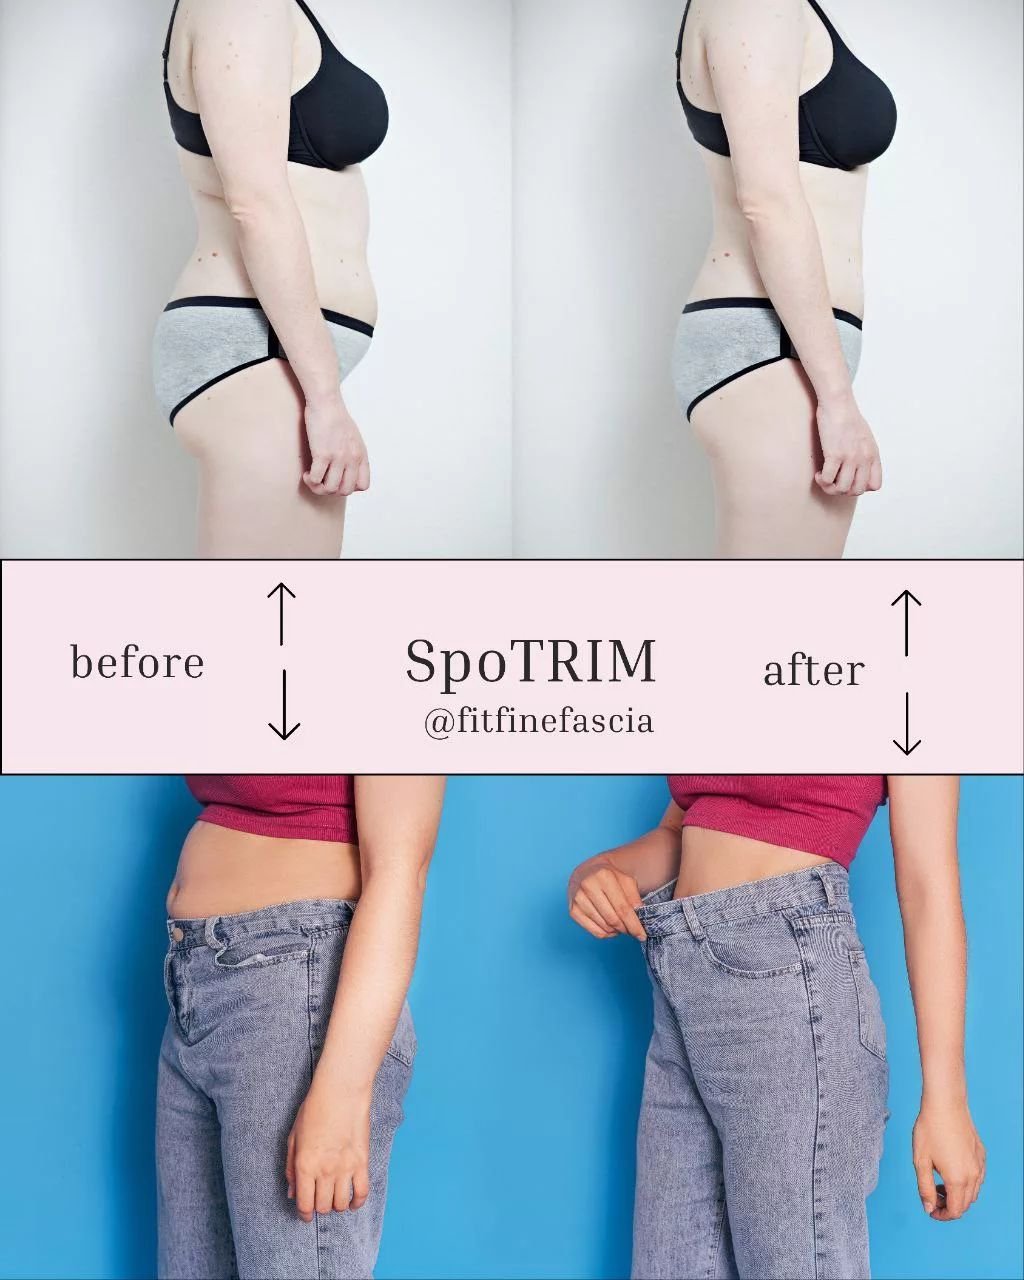 🌟 Get the Body You've Always Dreamed Of! 🌟

Are you ready to feel confident and look amazing this summer? My exclusive body firming and spot trimming treatment is the secret to achieving your fitness goals! 💪💃

✨ What makes my treatment special? 